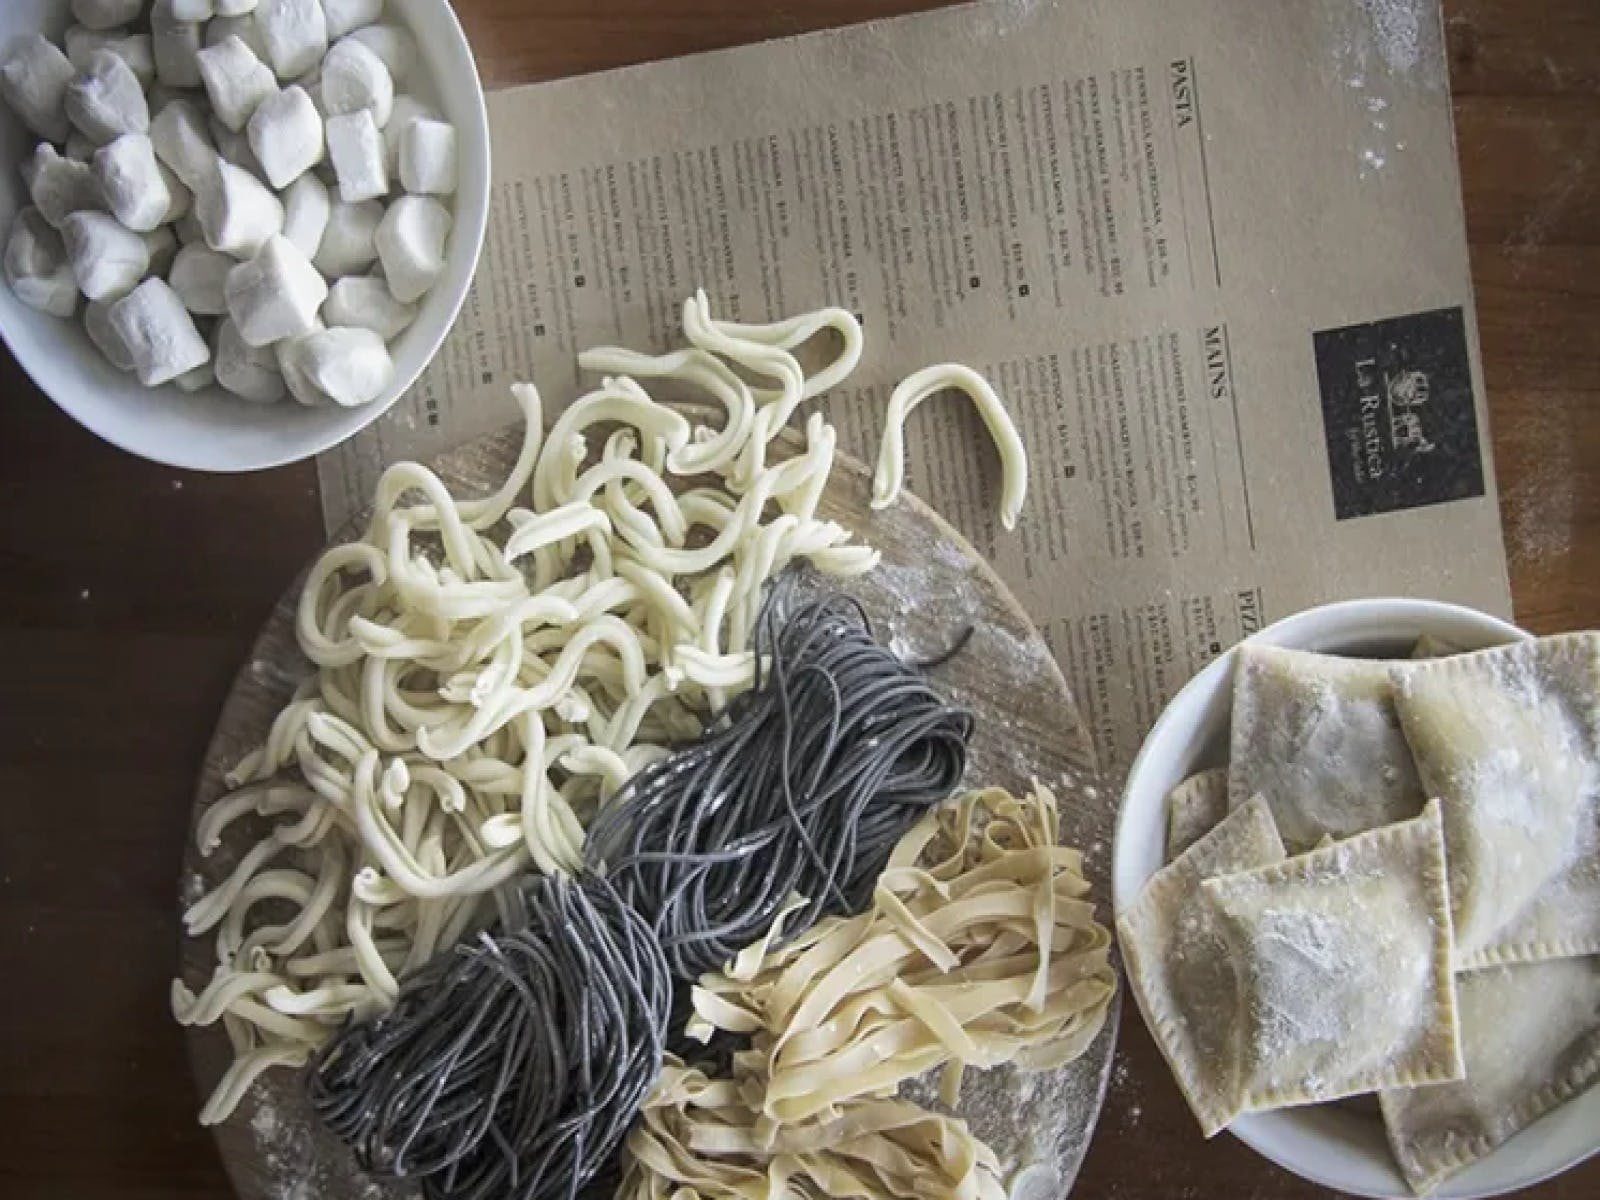 Some fresh pasta next to a menu on a table